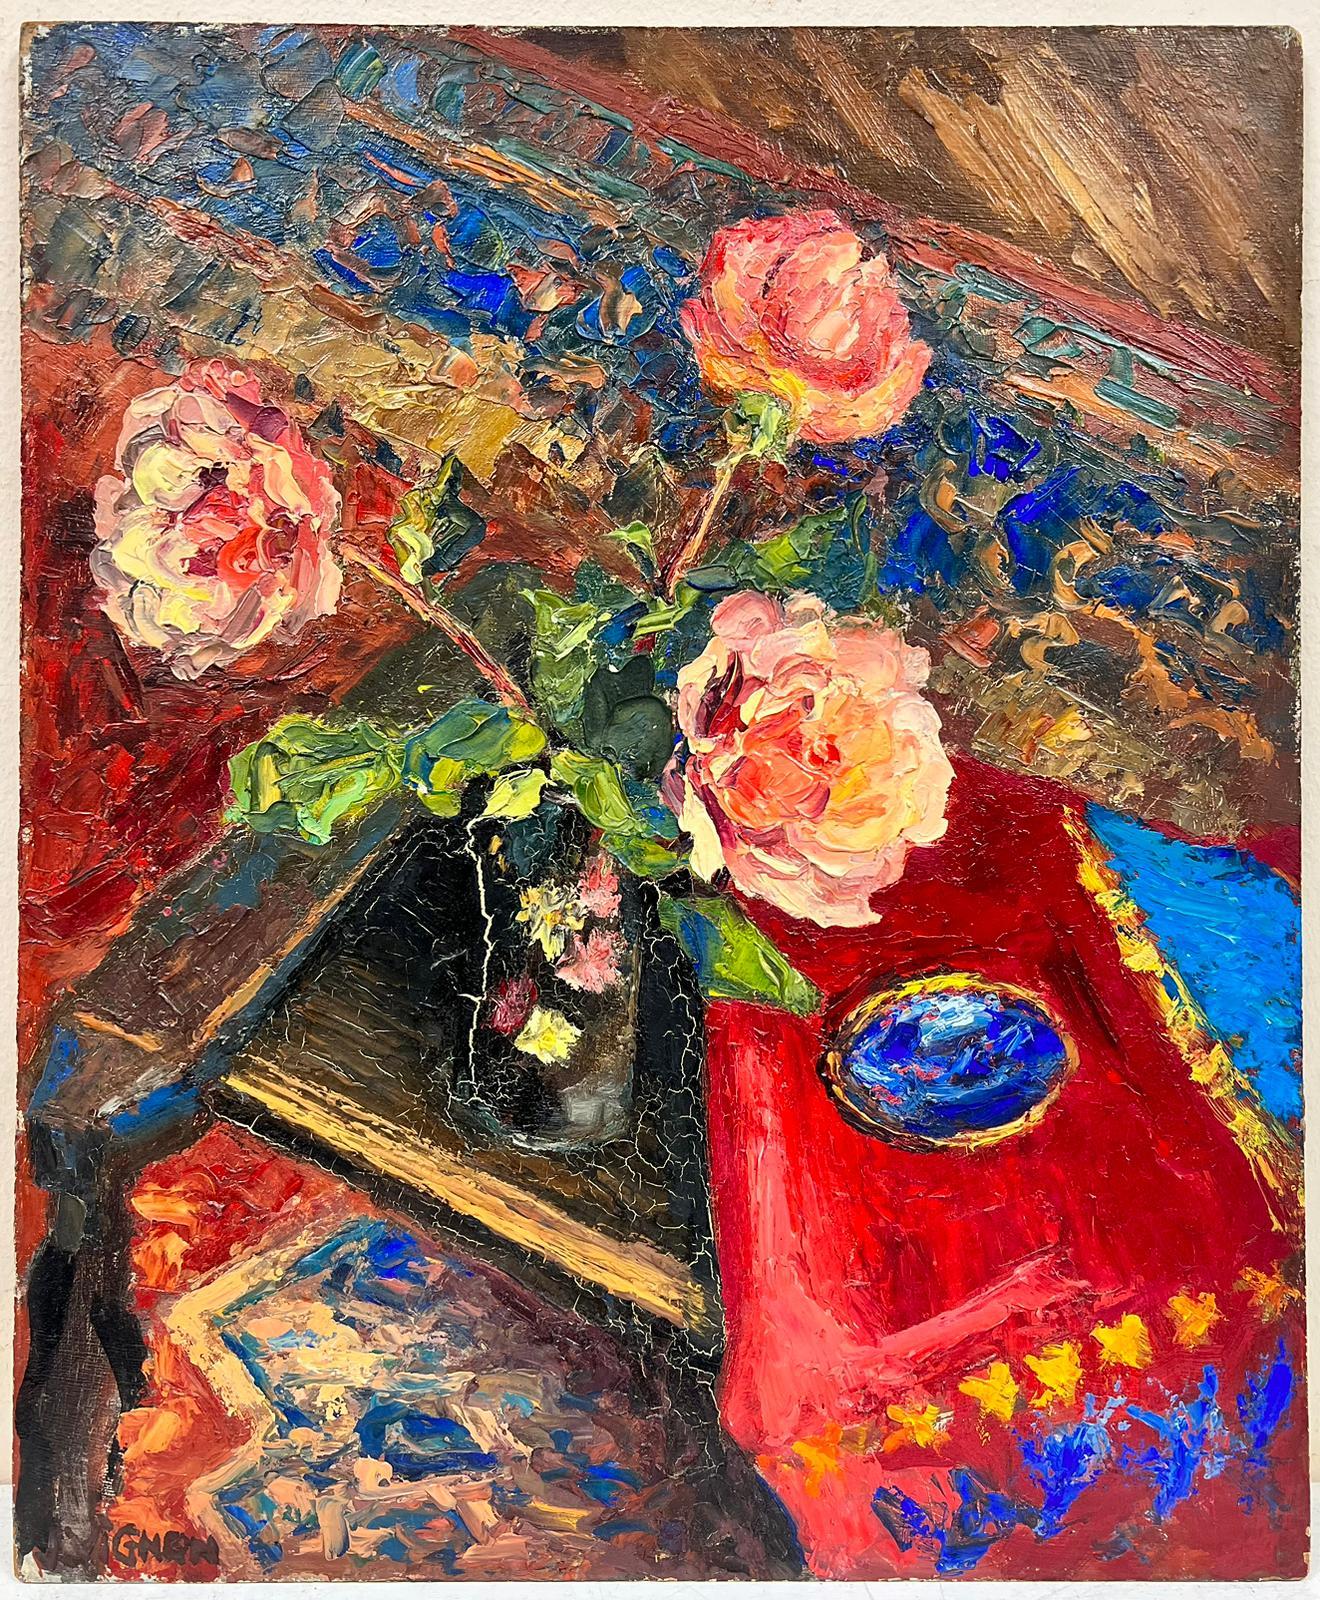 Bright and Vibrant Light Pink Dog Roses Thick Oil Impasto Still Life - Painting by Josine Vignon